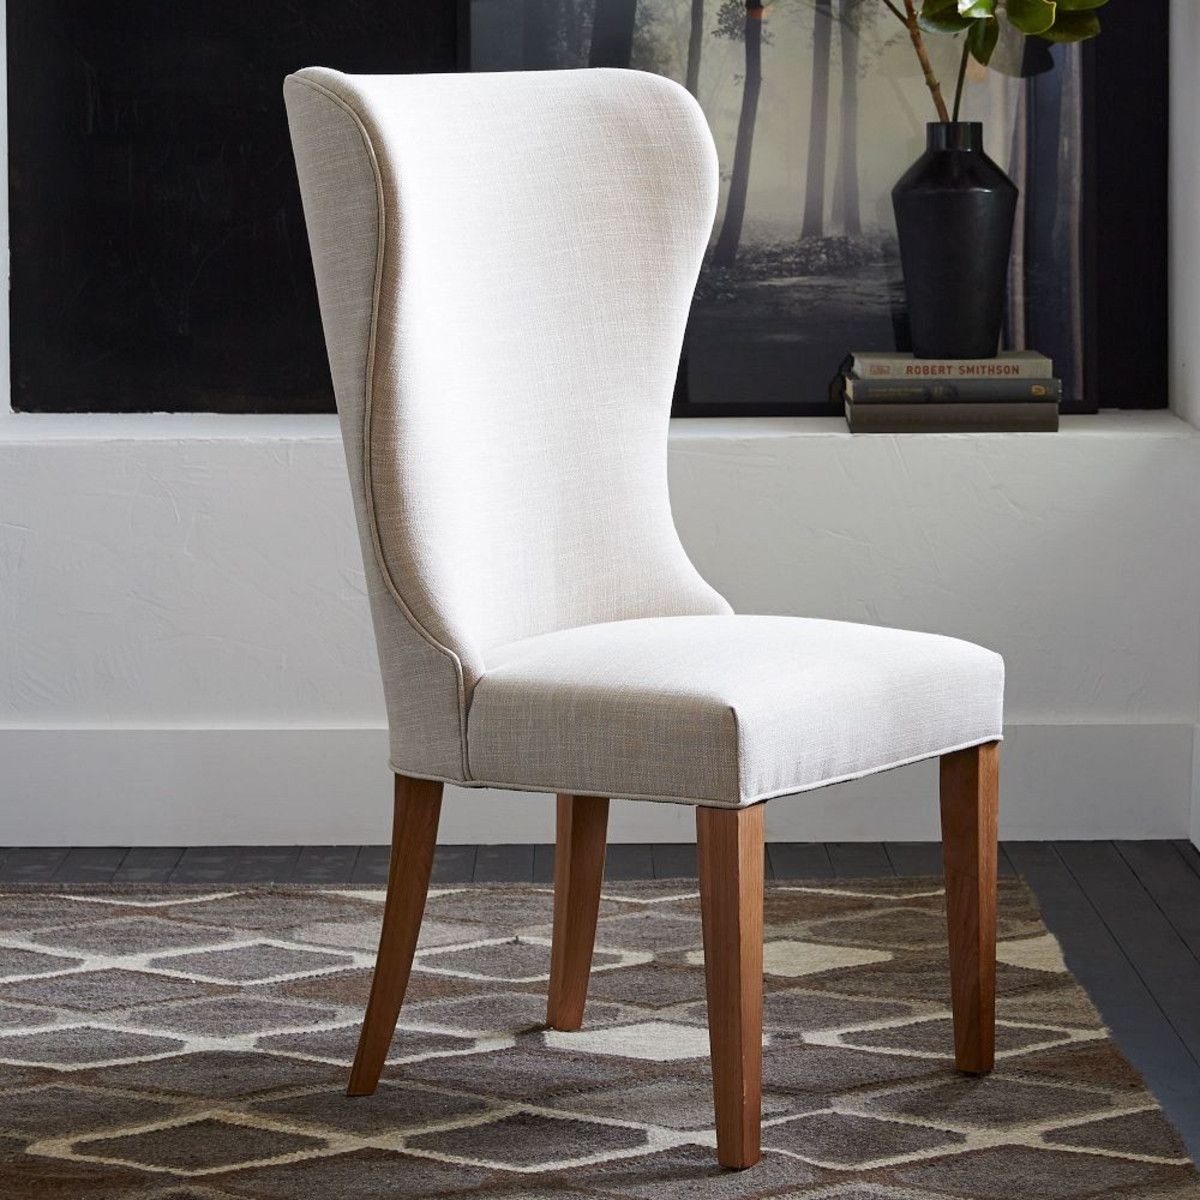 Albie wing dining chair